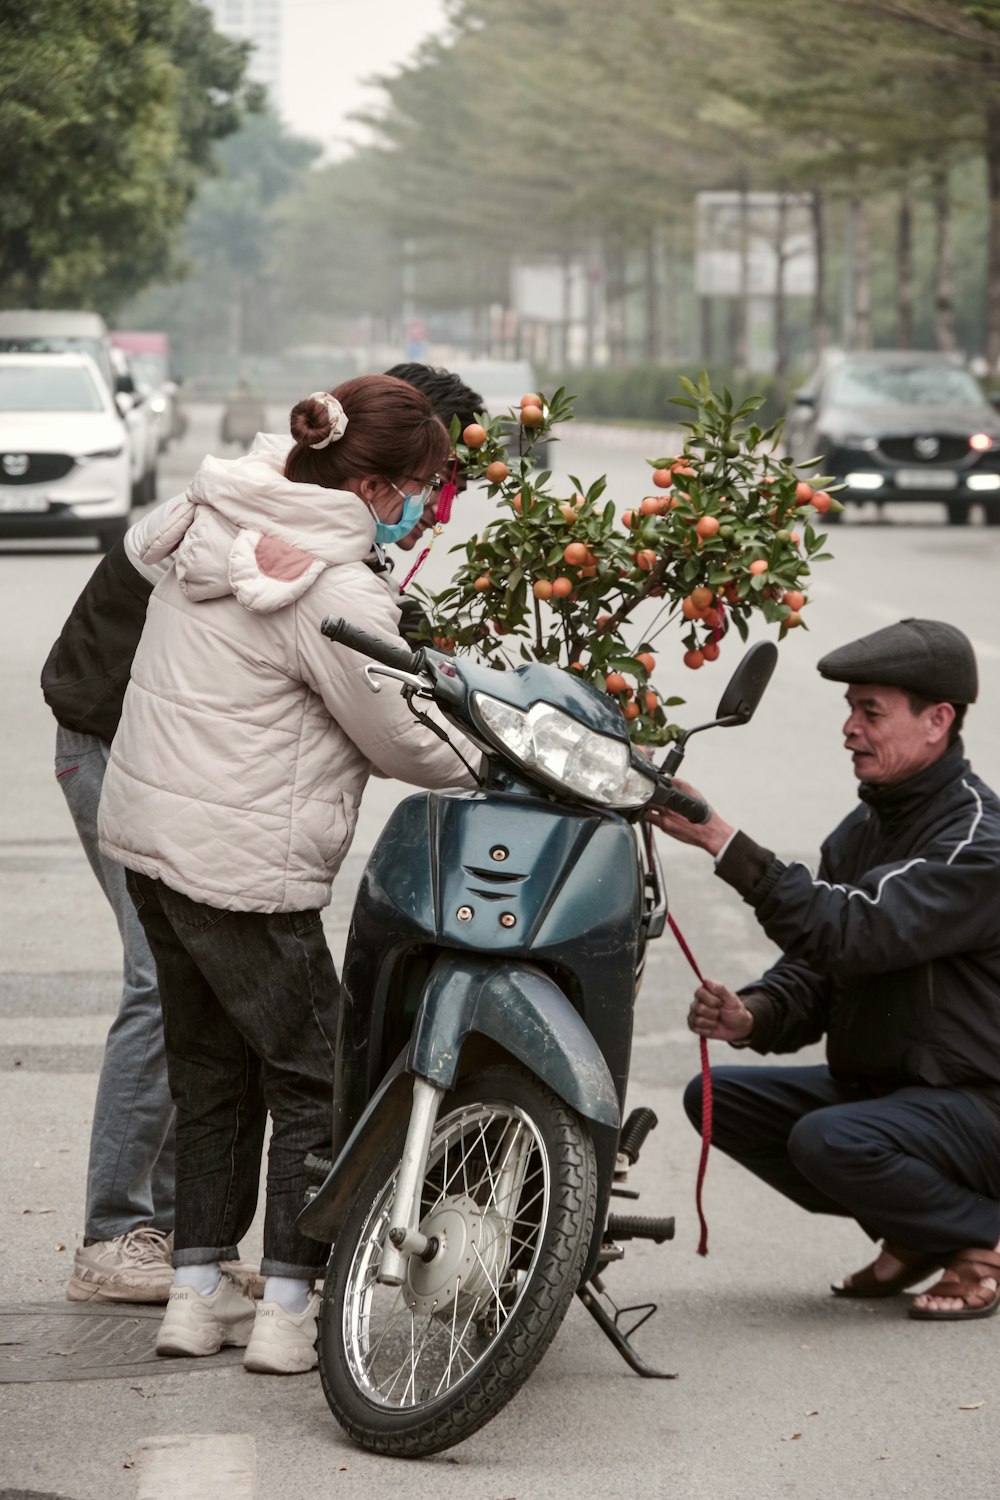 a man kneeling down next to a motorcycle with a potted plant on the back